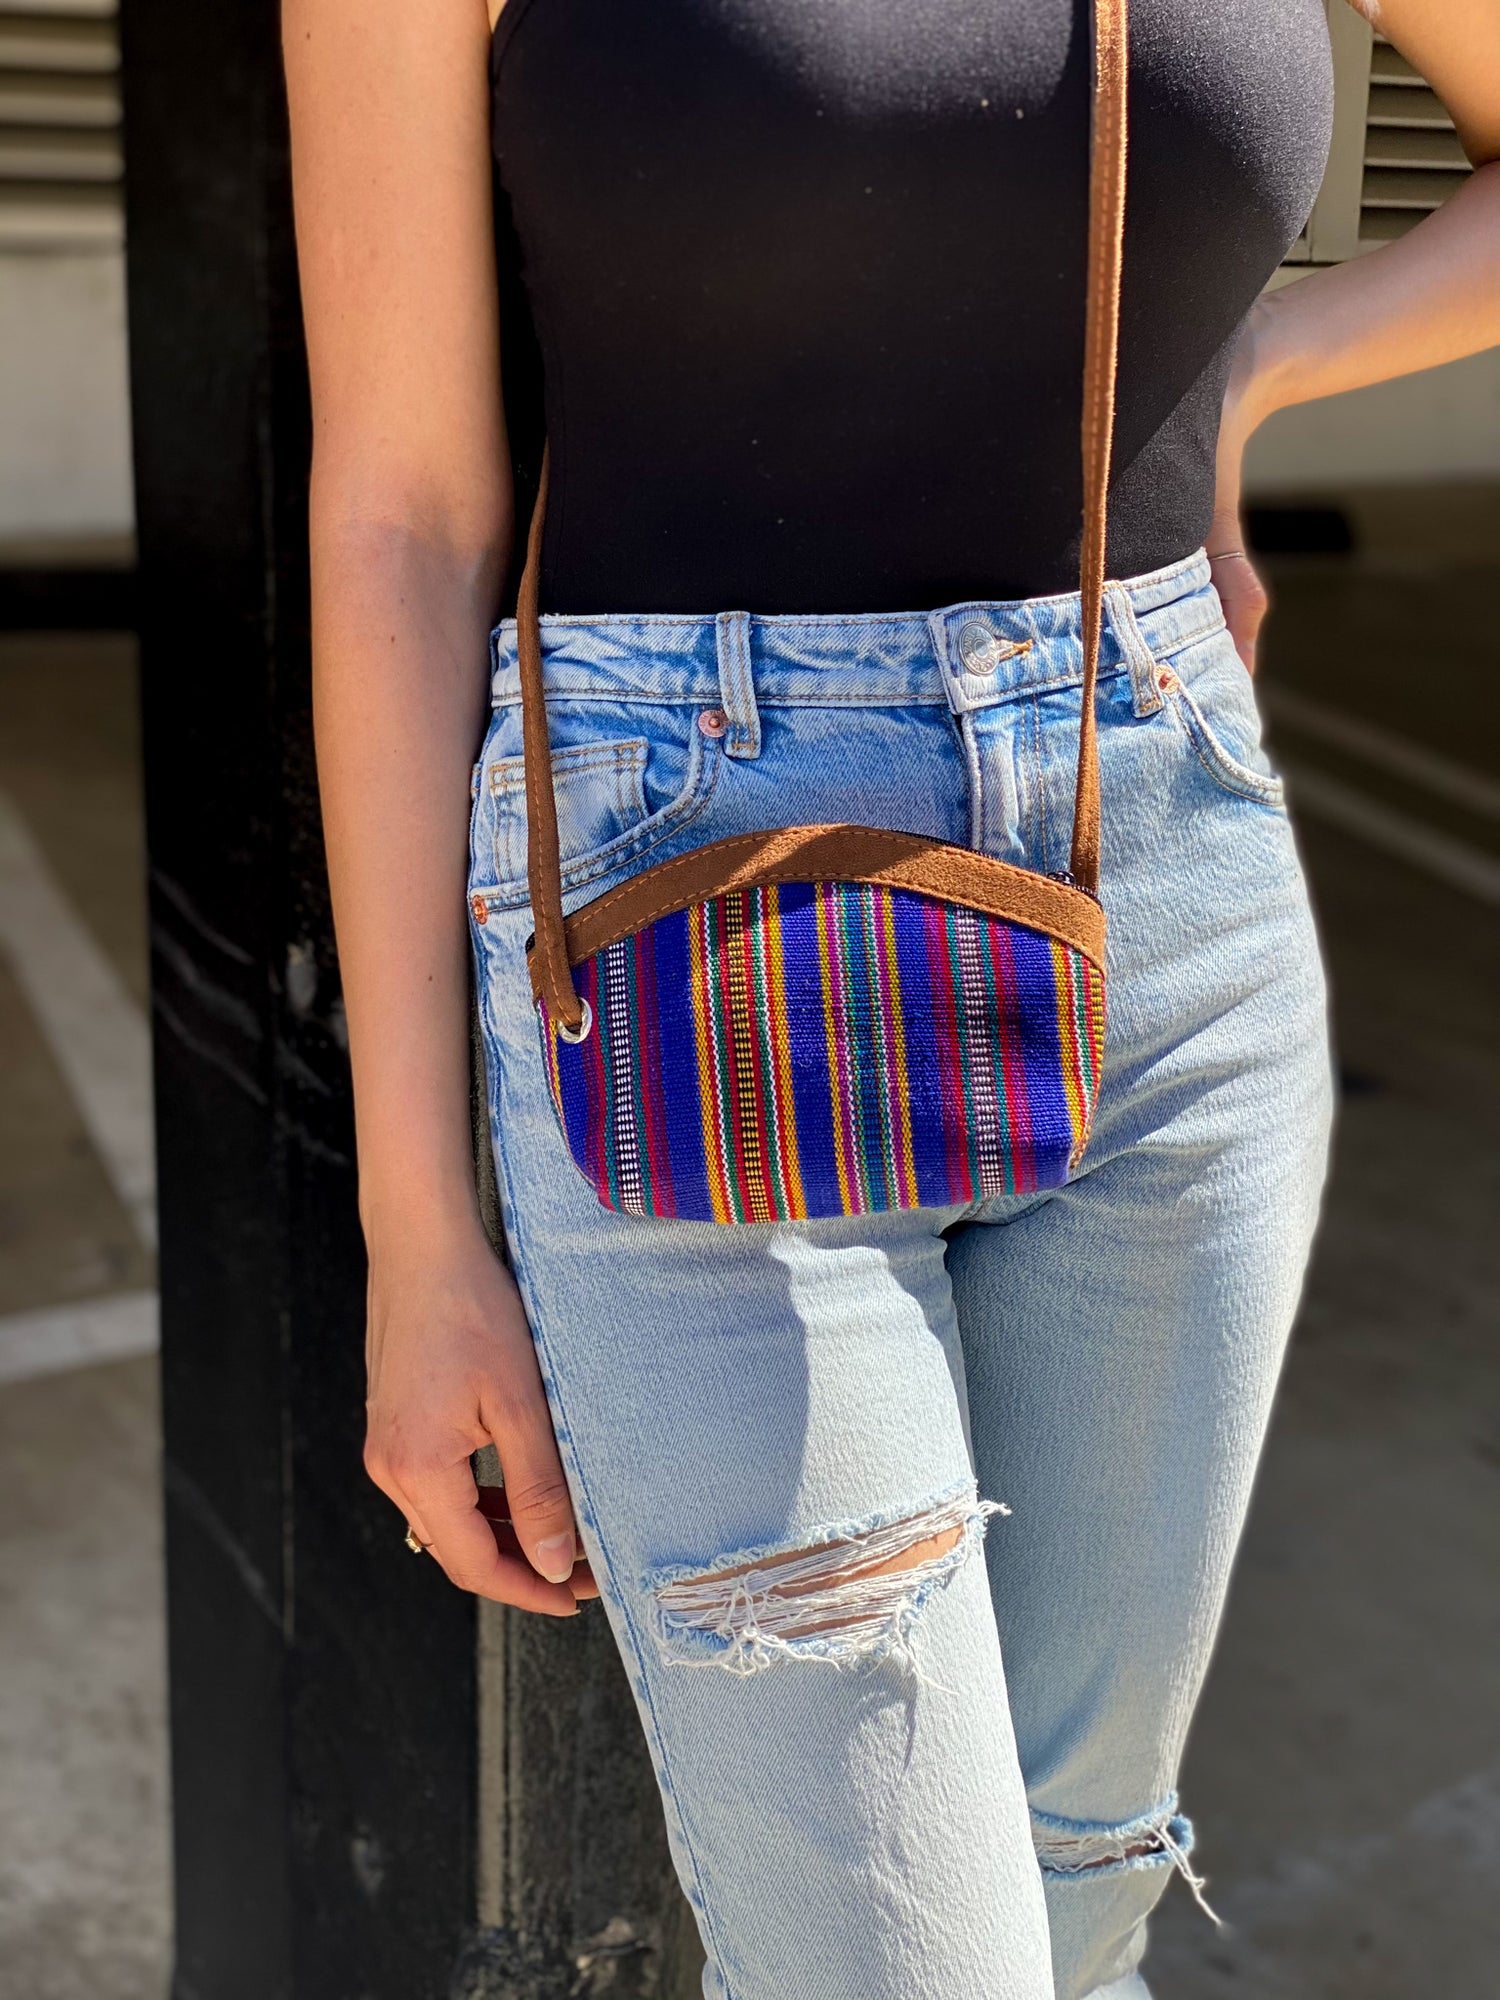 Handmade in Guatemala Small Crossbody Bag. Handwoven intricate fabric. Vibrant colors and faux suede straps and detail. Front zipper closure. Perfect for summer and super lightweight.